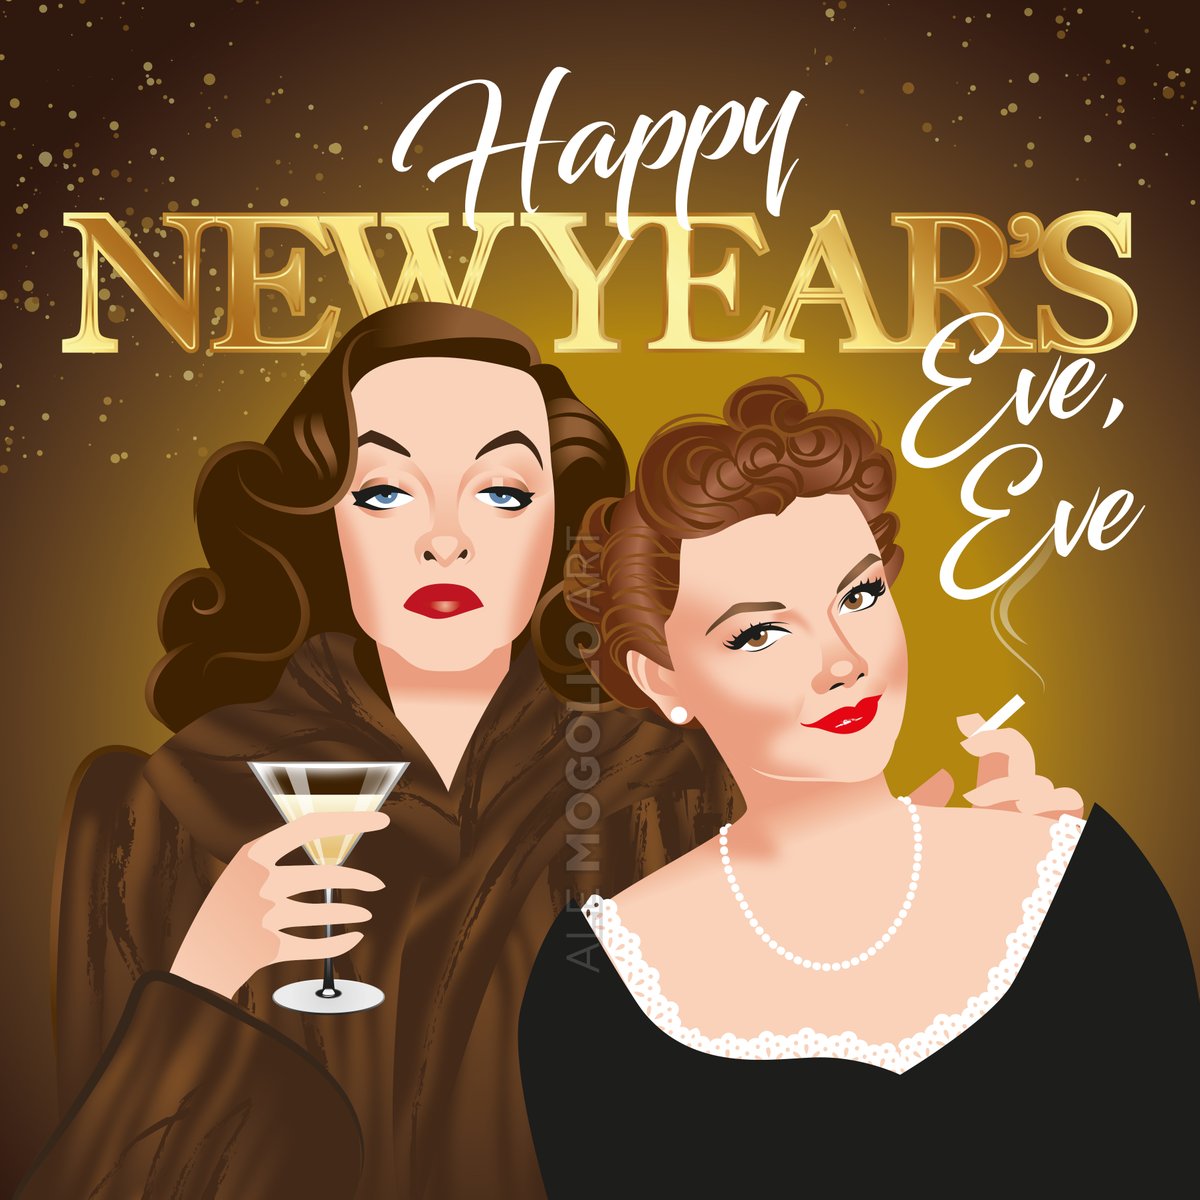 Happy New Year’s Eve, Eve.
Be sure to start 2024 surrounded by your best pals 🤪
#happynewyear #happynewyearseve #happynewyearseveeve #allabouteve #bettedavis #annebaxter #classichollywood #tcmparty #FilmTwitter #alejandromogolloart